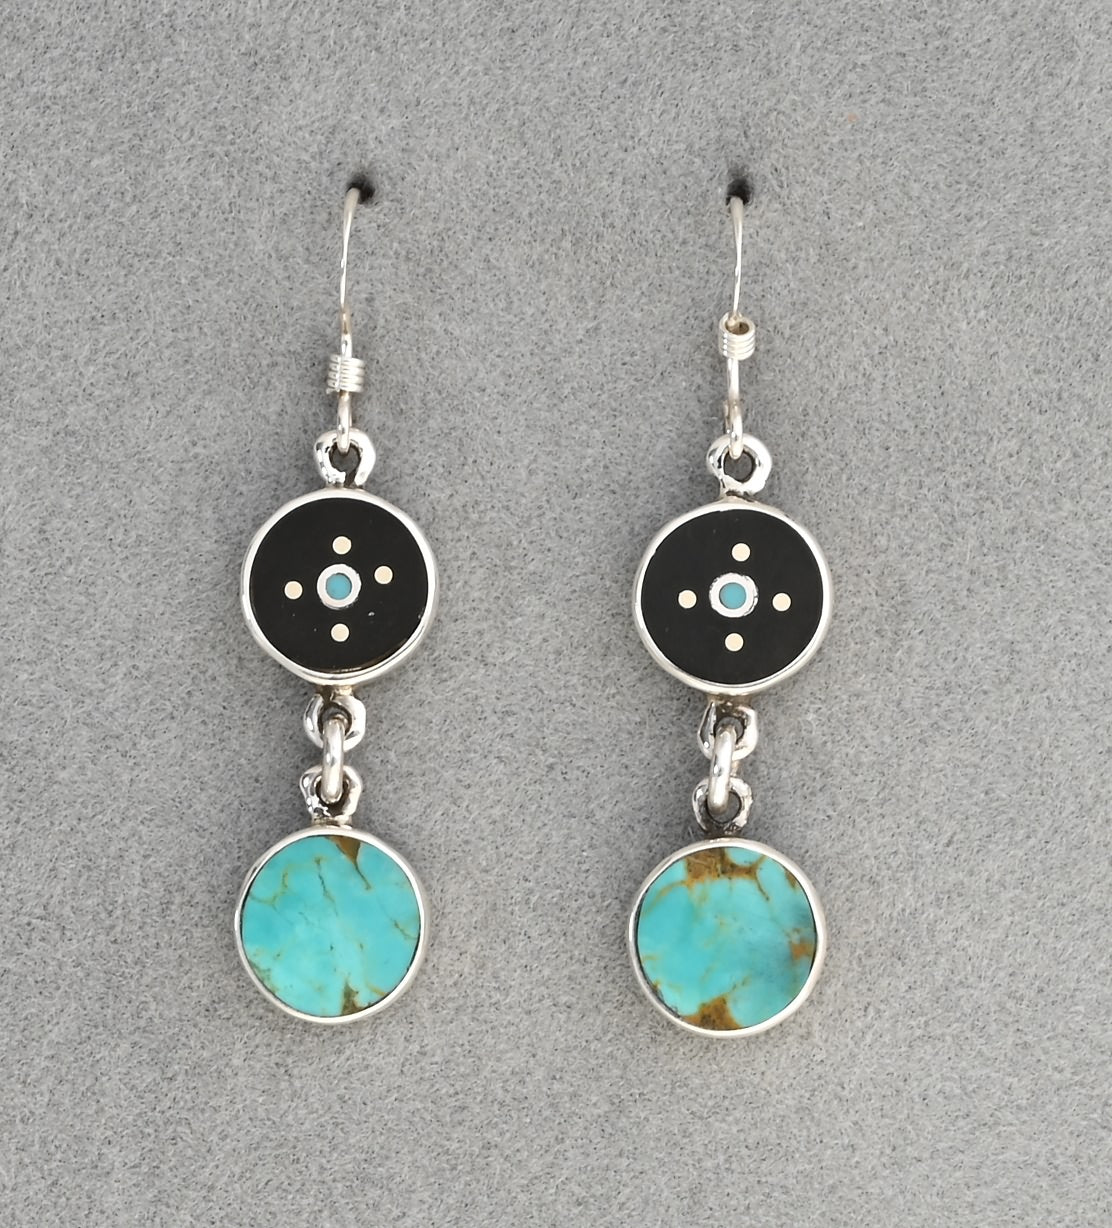 Earrings with Double Round Drops by Jimmy Poyer